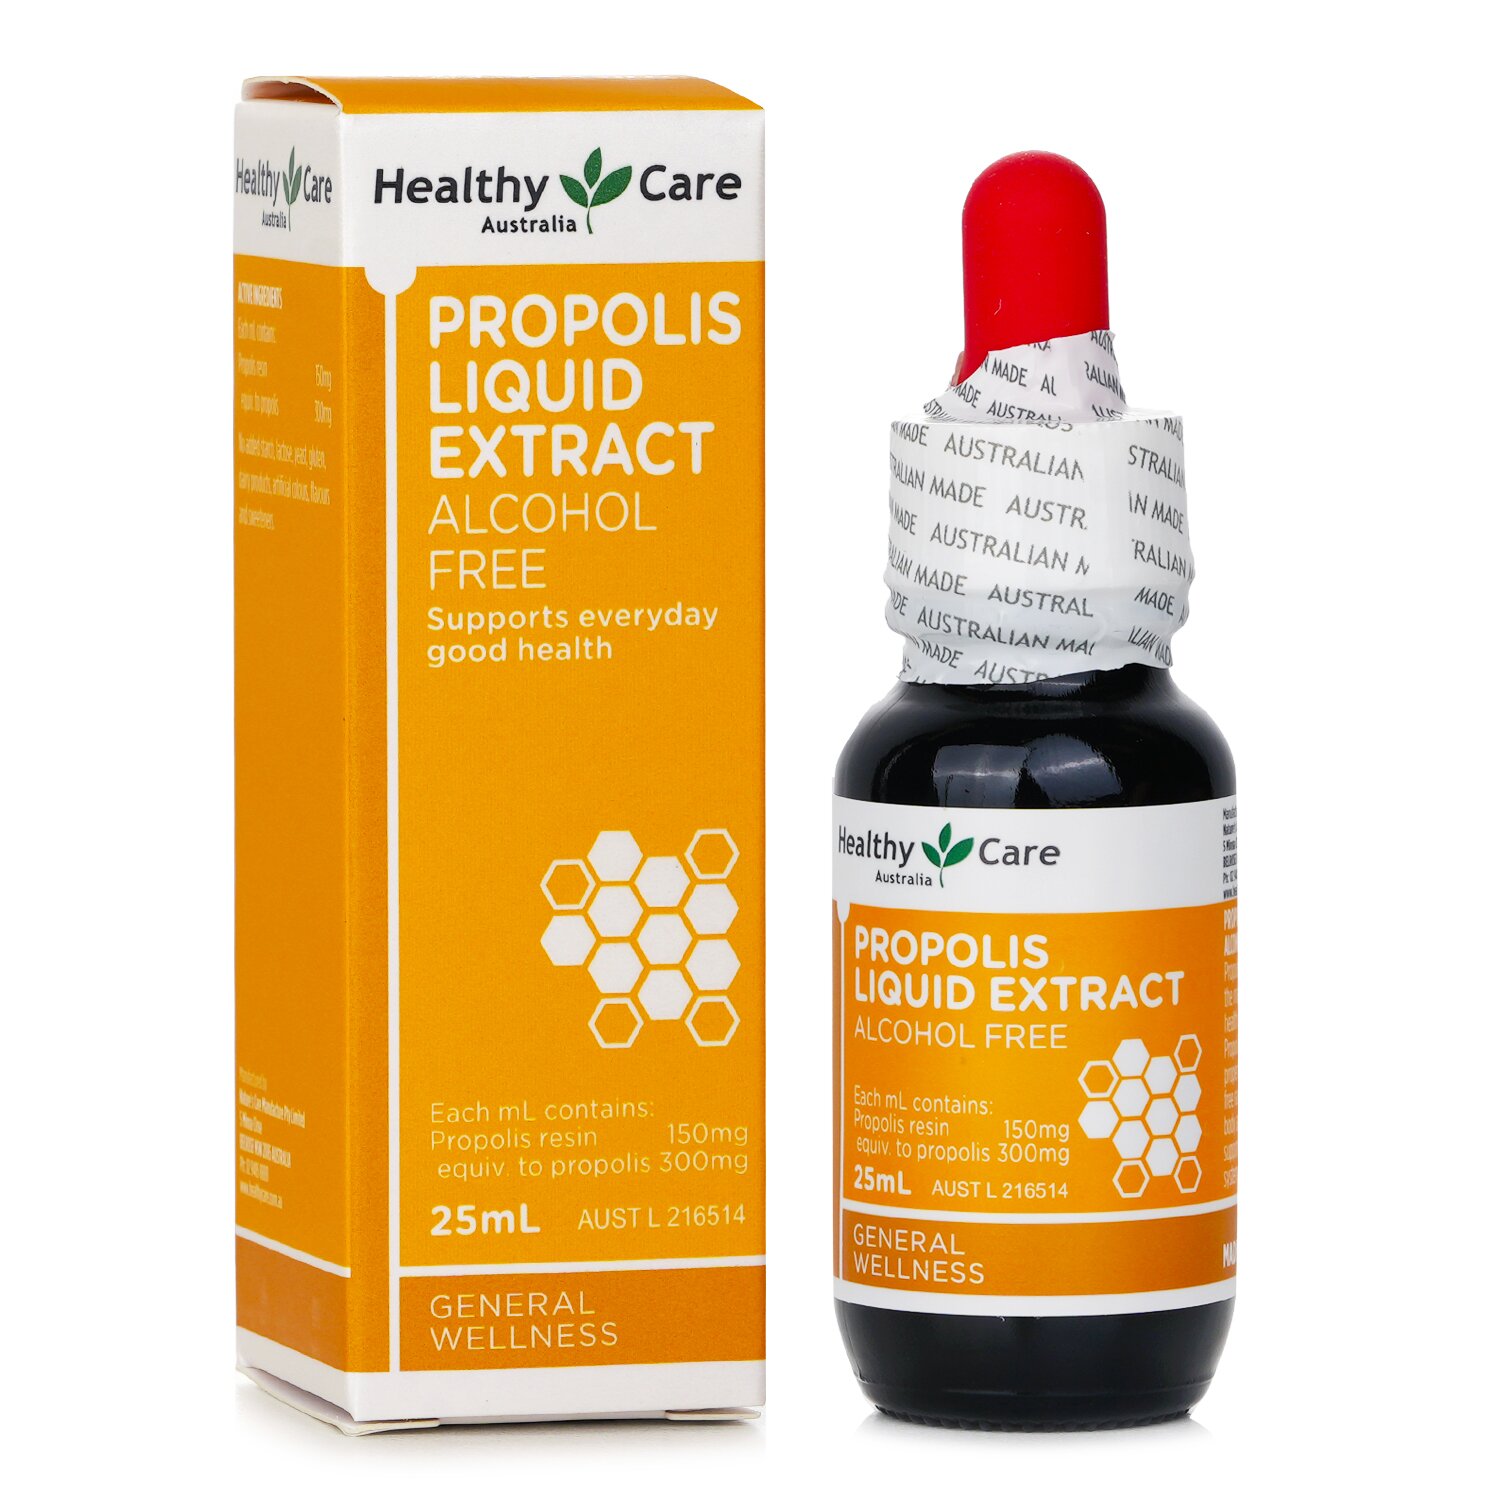 Healthy Care Healthy Care Propolis Liquid Extract Alcohol Free - 25ml 25ml